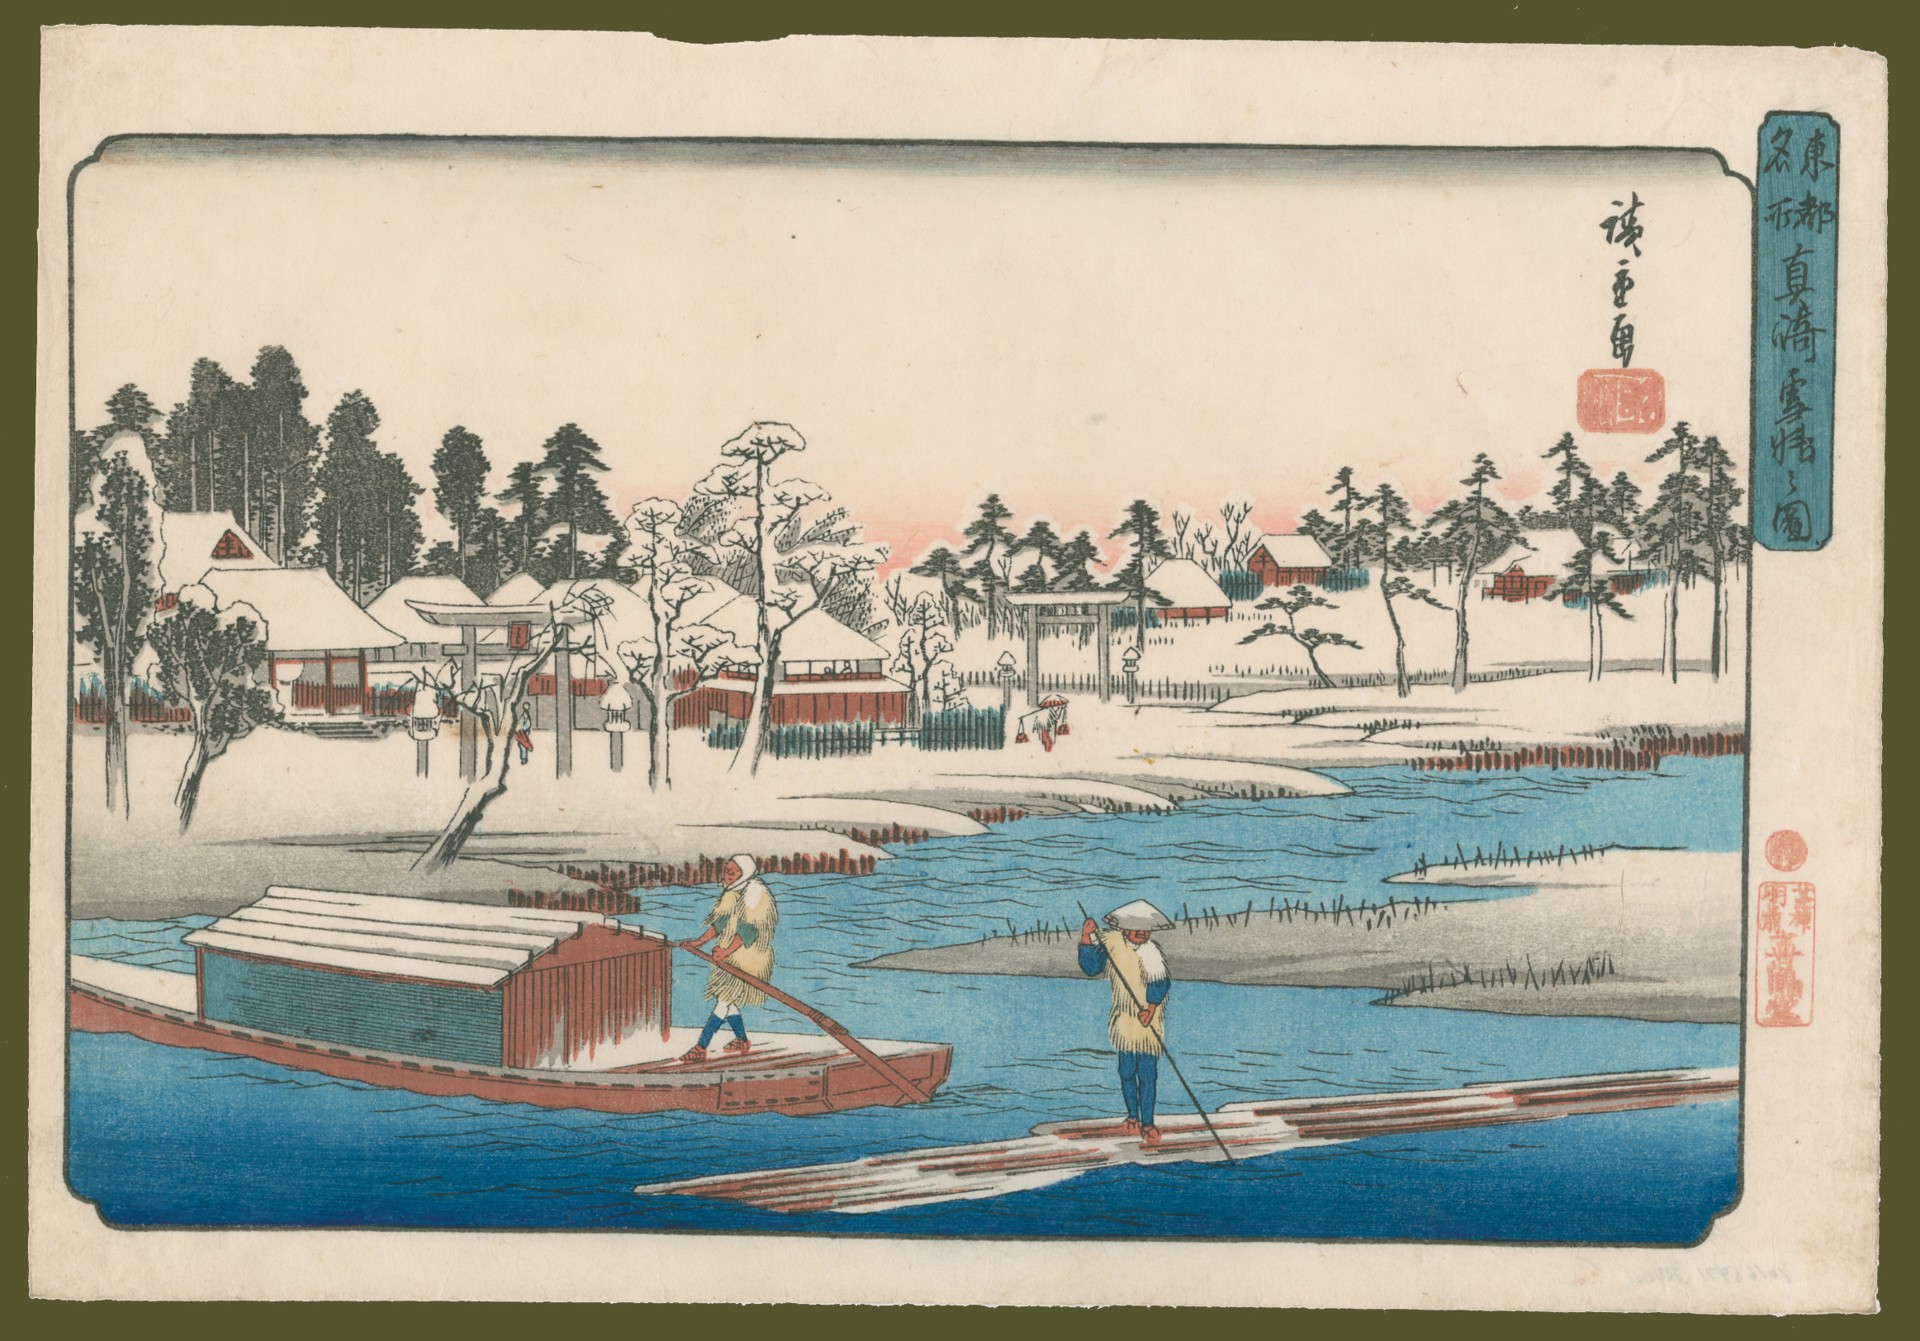 Clearing Weather After Snow, Masaki Famous Places in the Eastern Capital by Hiroshige